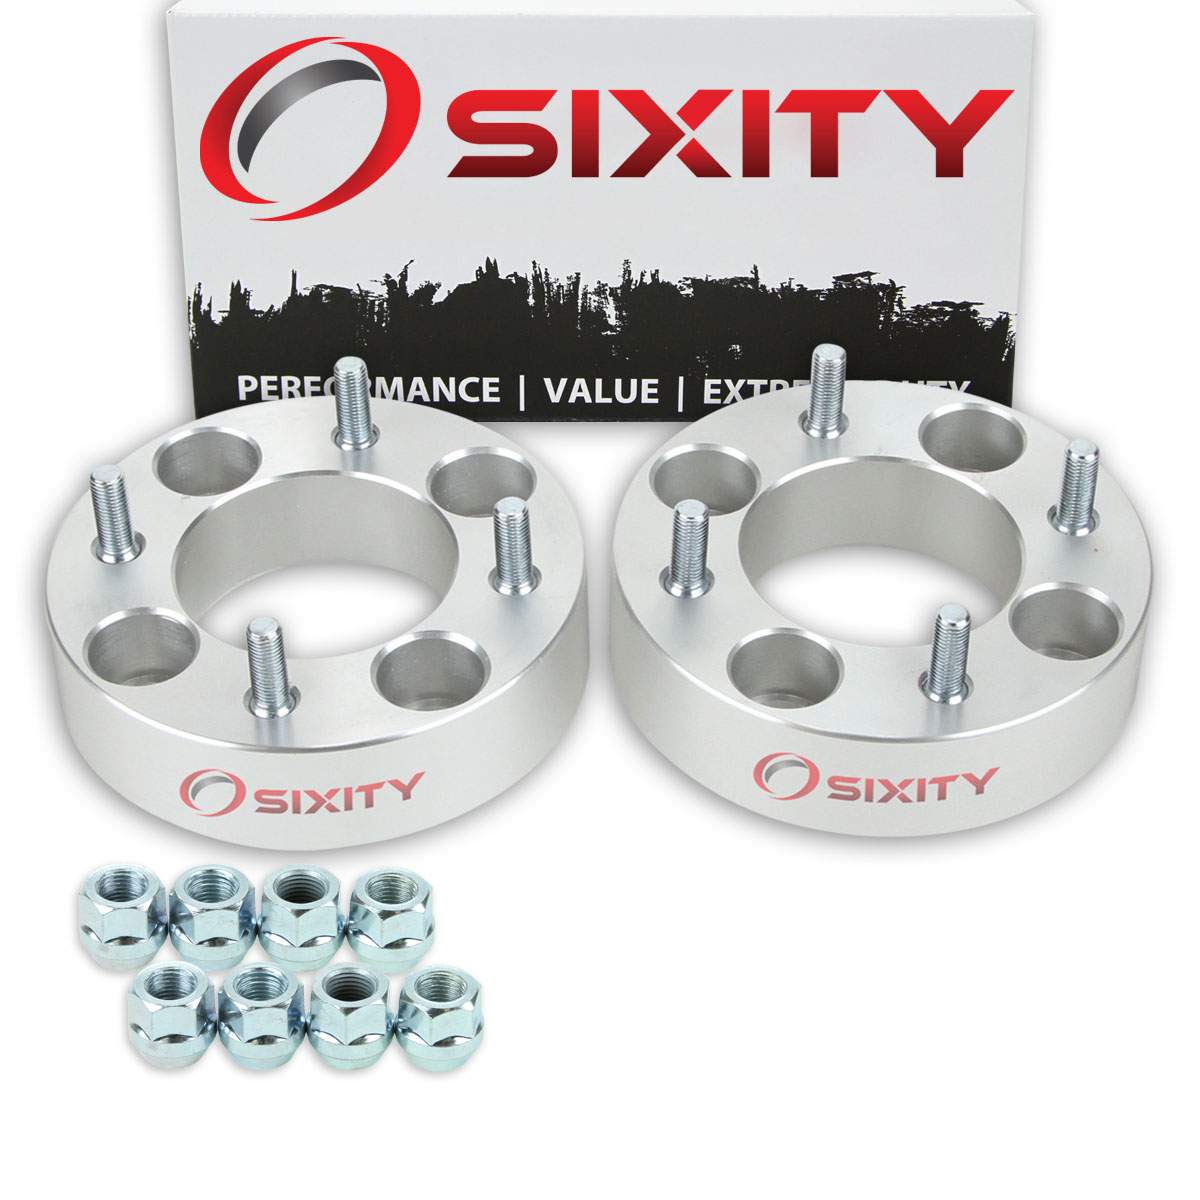 Sixity 2 pc 1.5 Inch 1988-2000 Honda TRX 300 2x4 4/110 Front Wheel Spacers